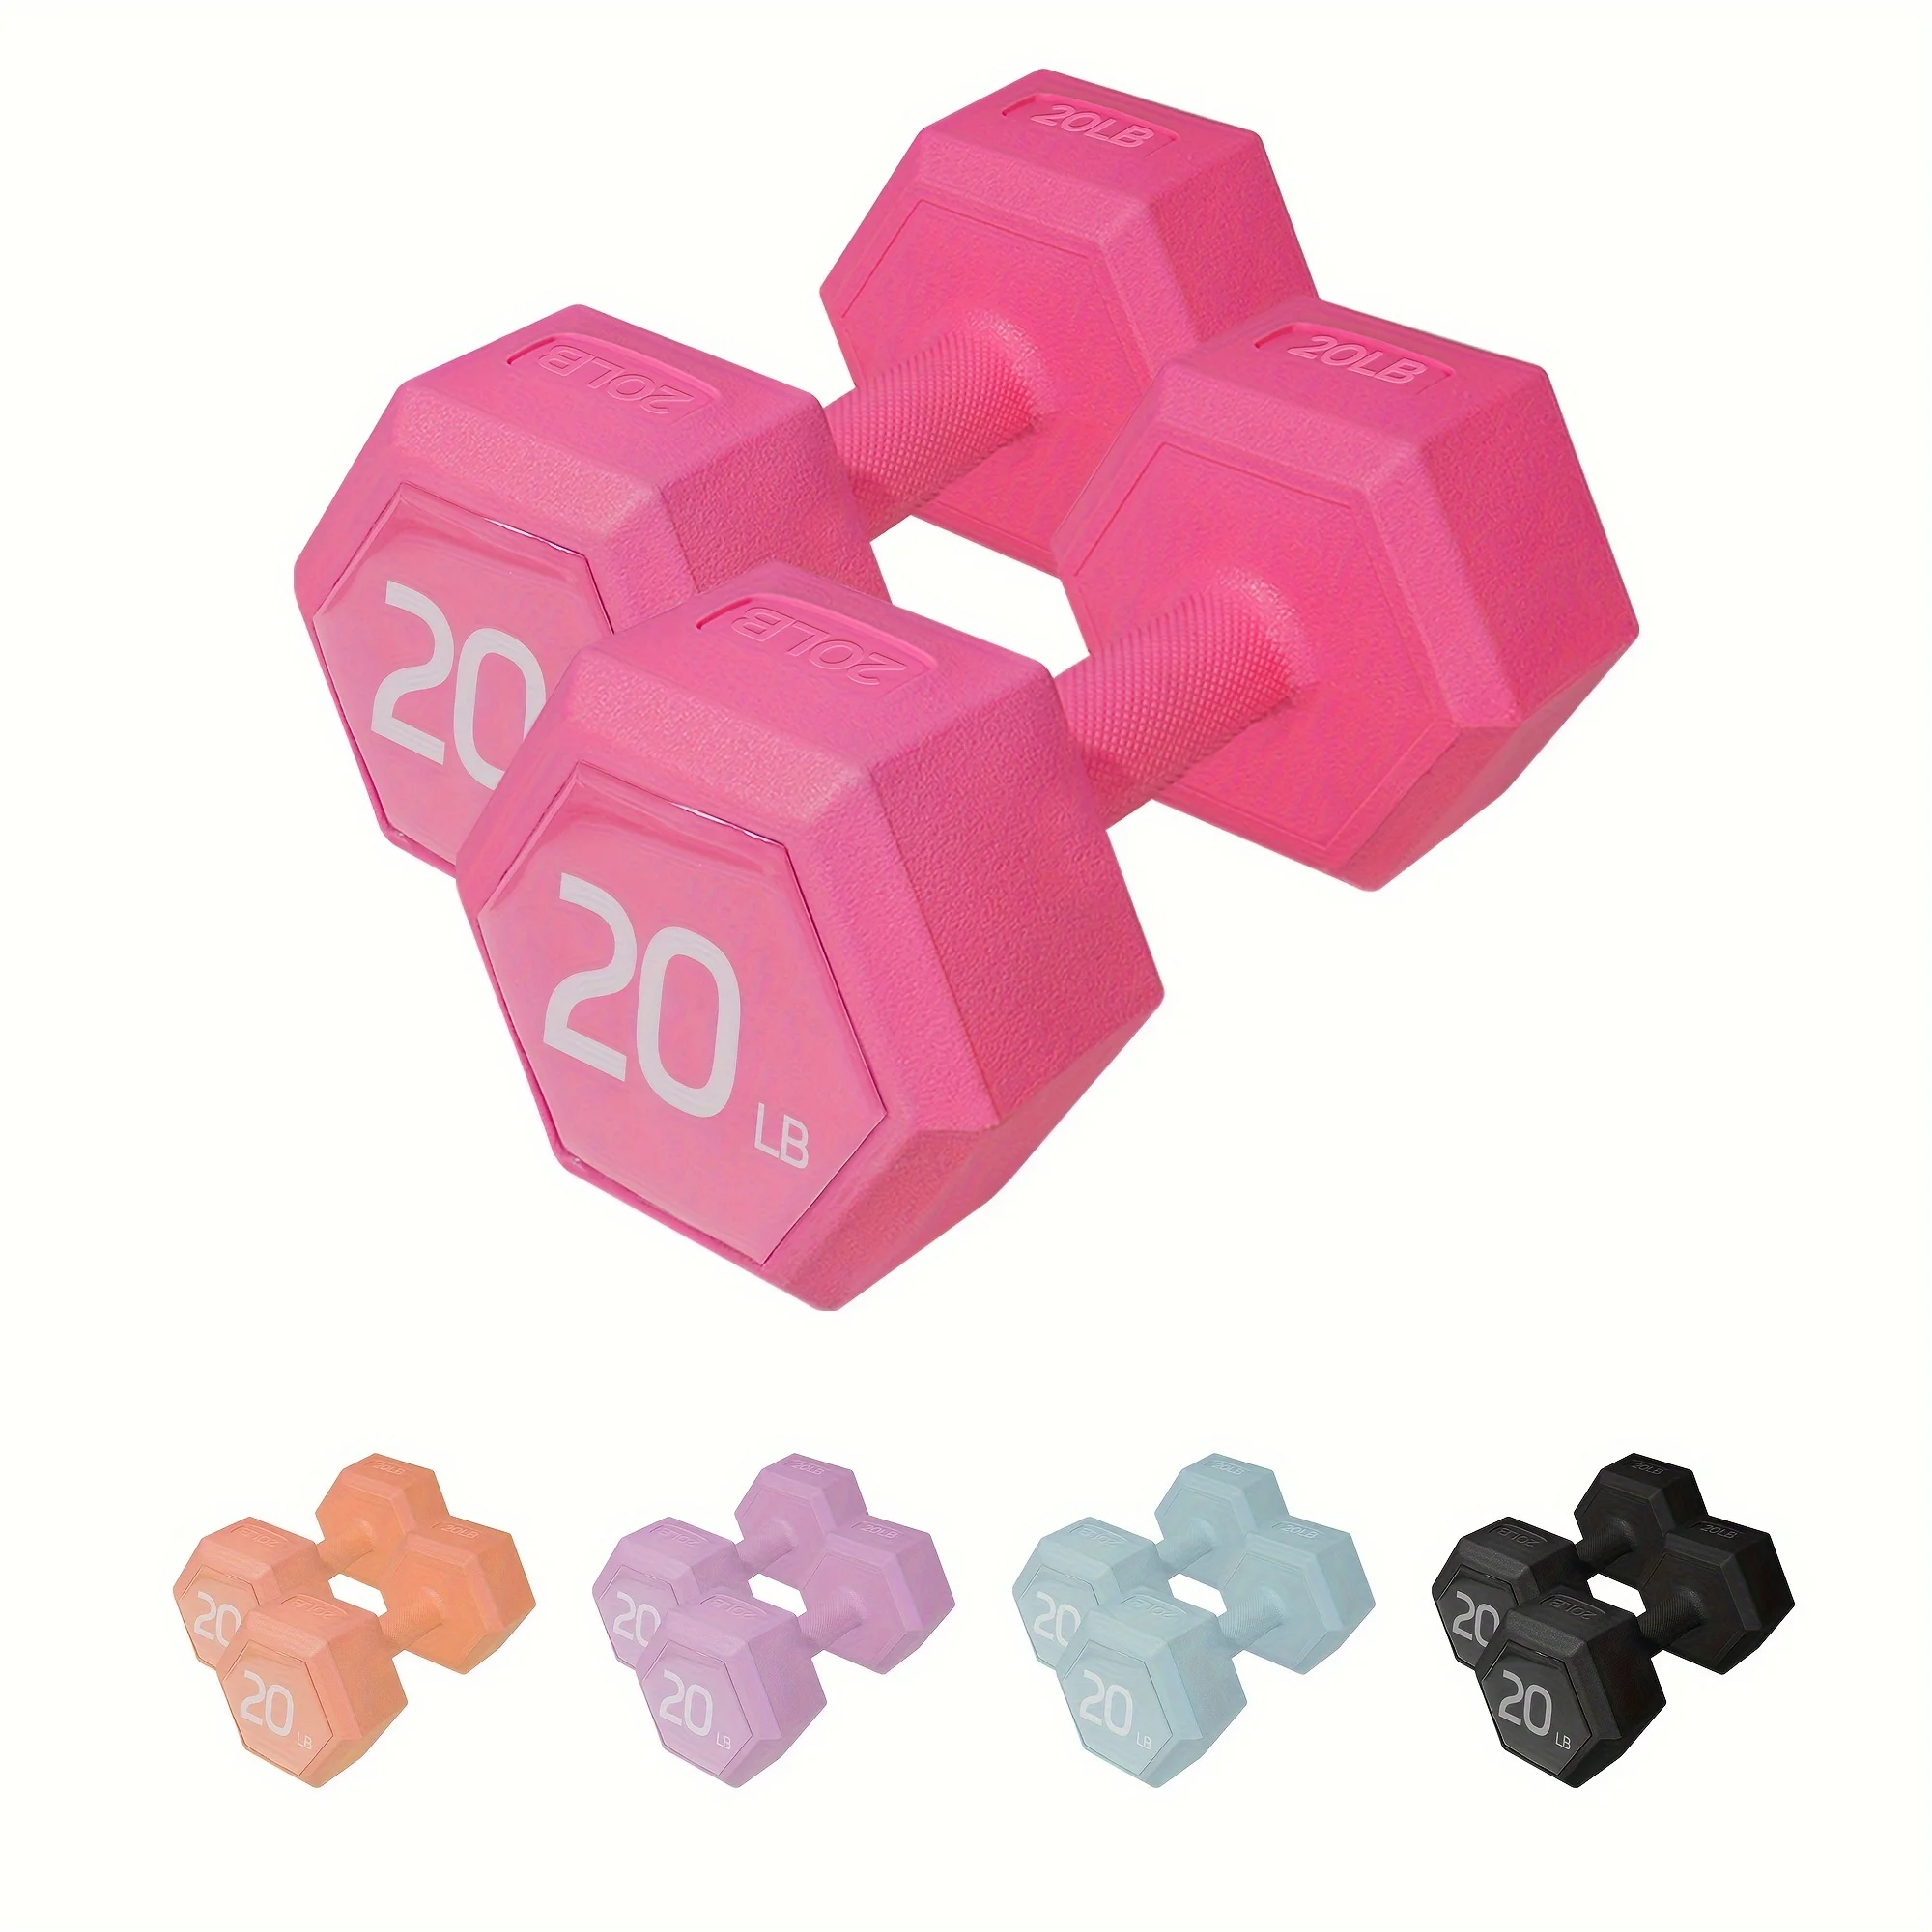 

Dumbbell Sets - 20lb Dumbbells Pair Hand Weights, Set Of 2 - Easy Grip - Free Arm Weights For Men And Women, Home Gym Exercise E